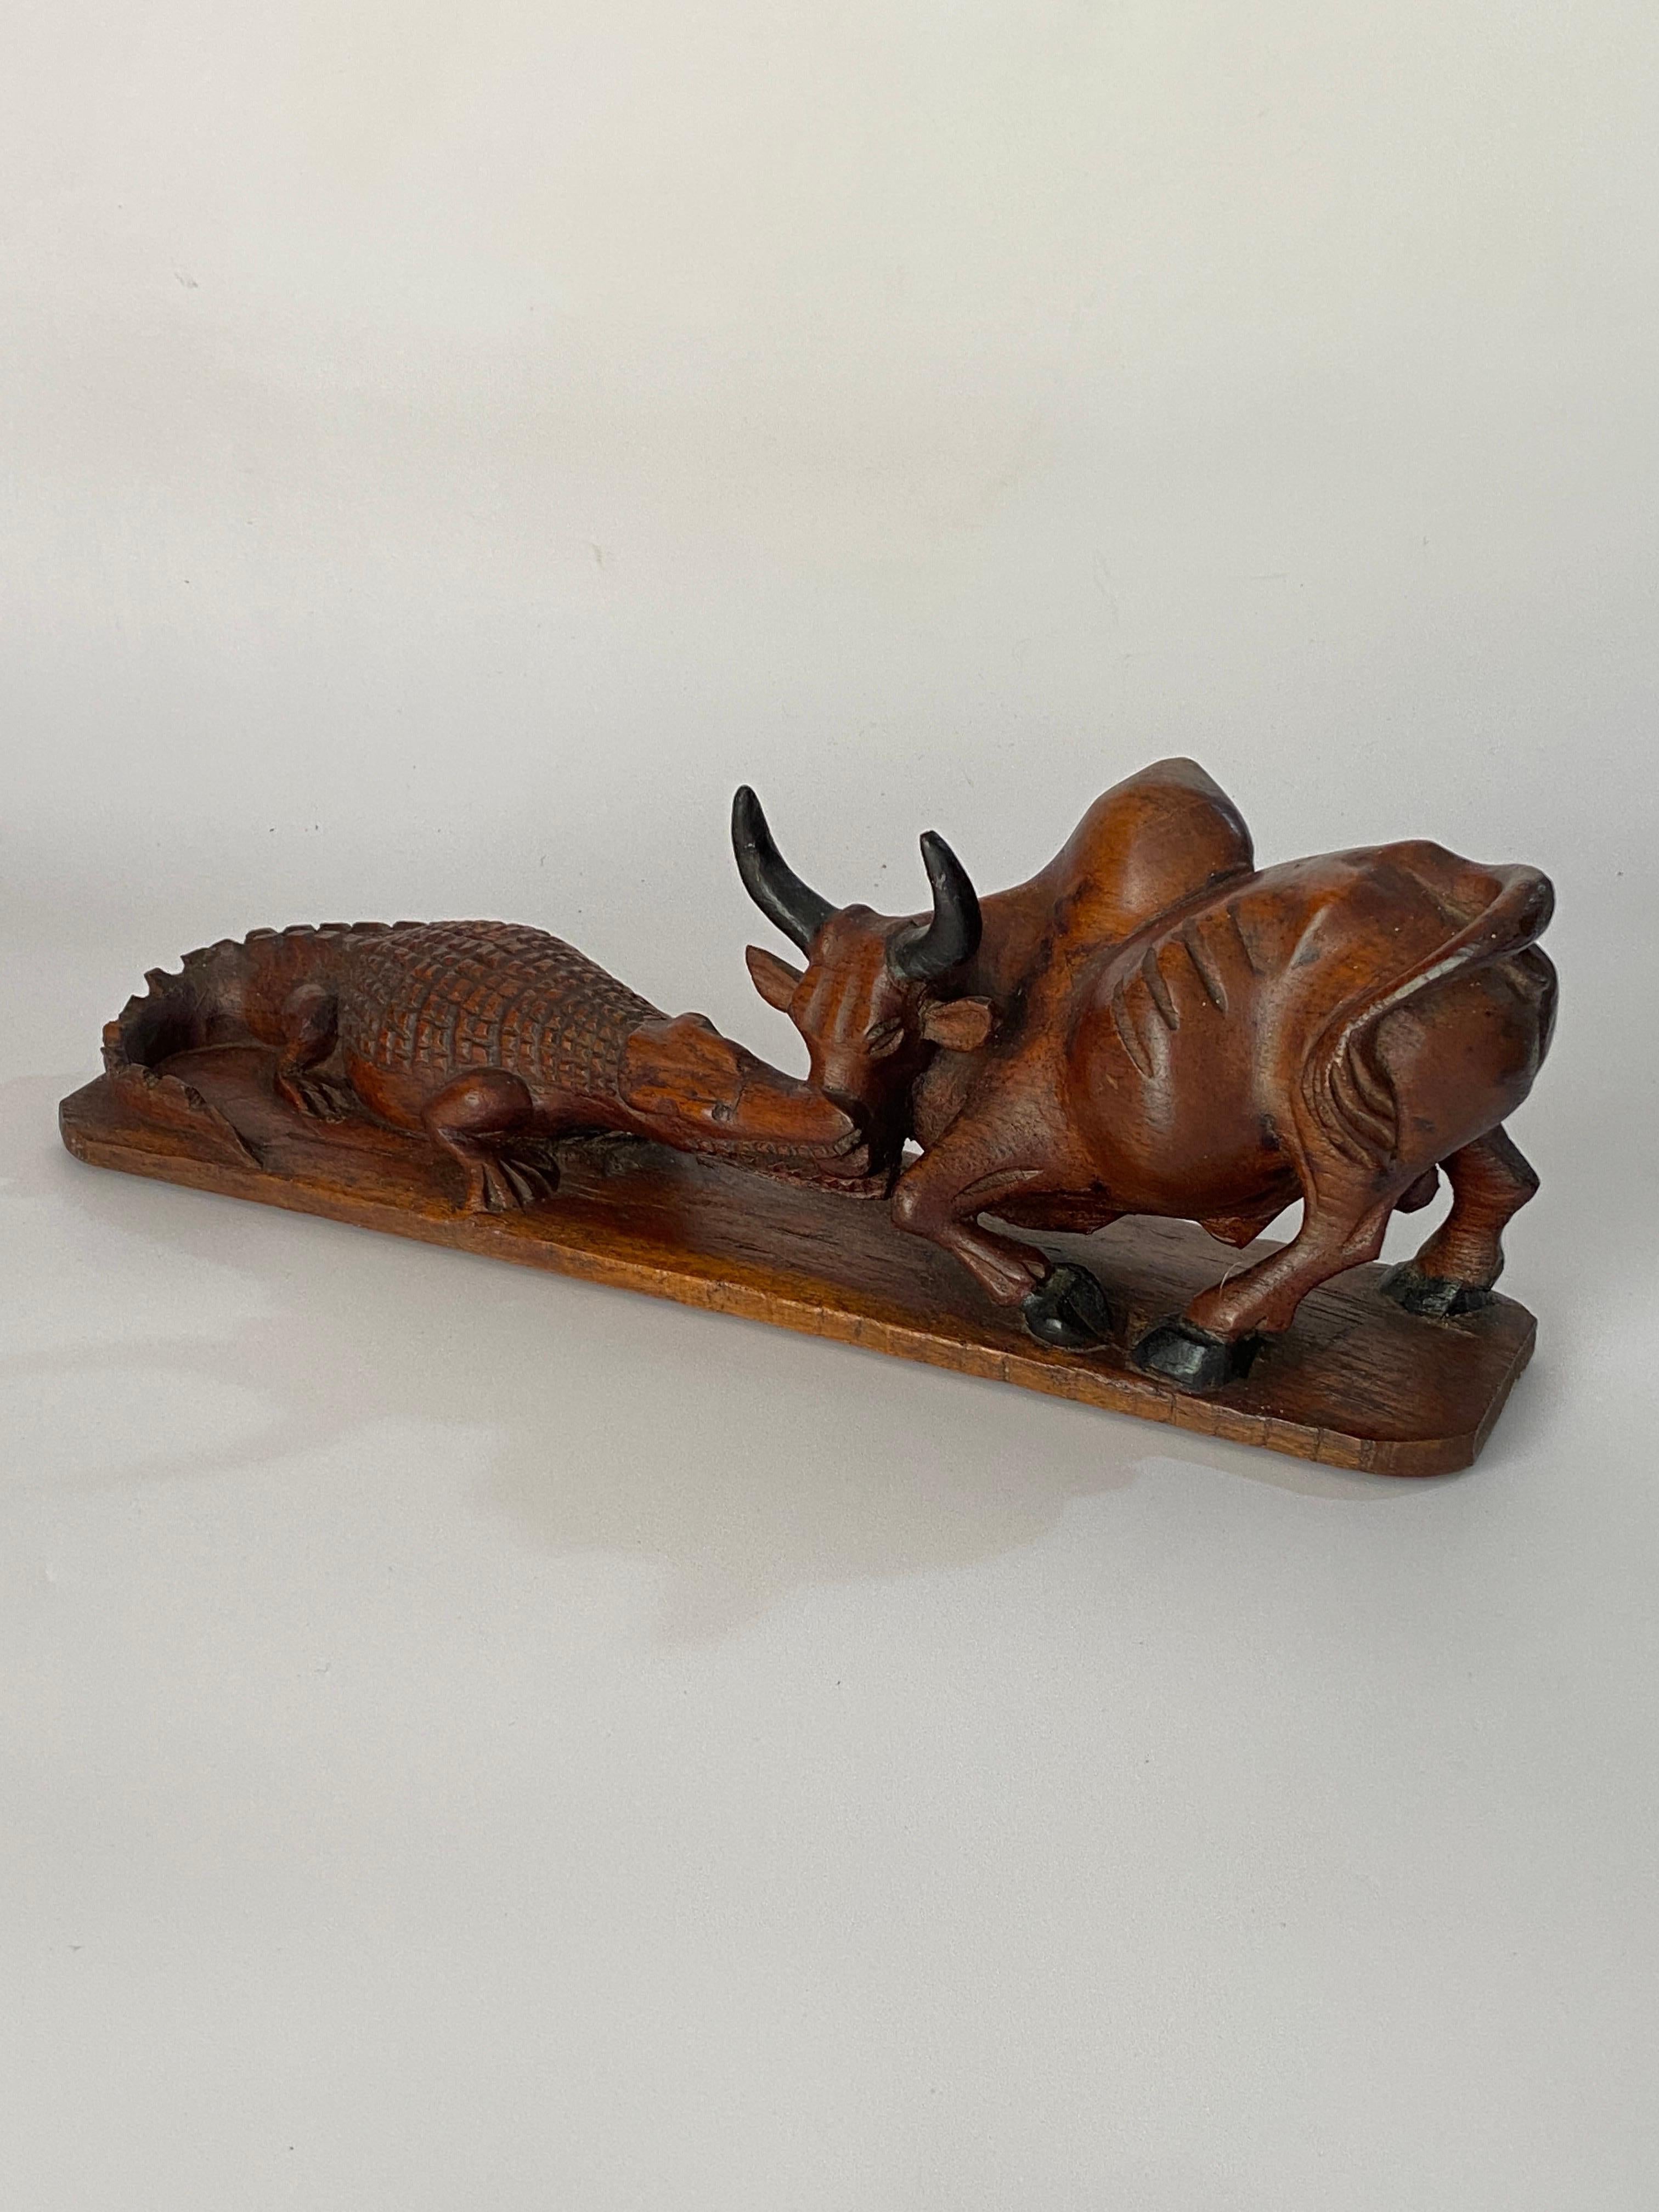 Wood Sculpture Representing a Crocodile and a Bull Fighting, in Wood France 1930 For Sale 4